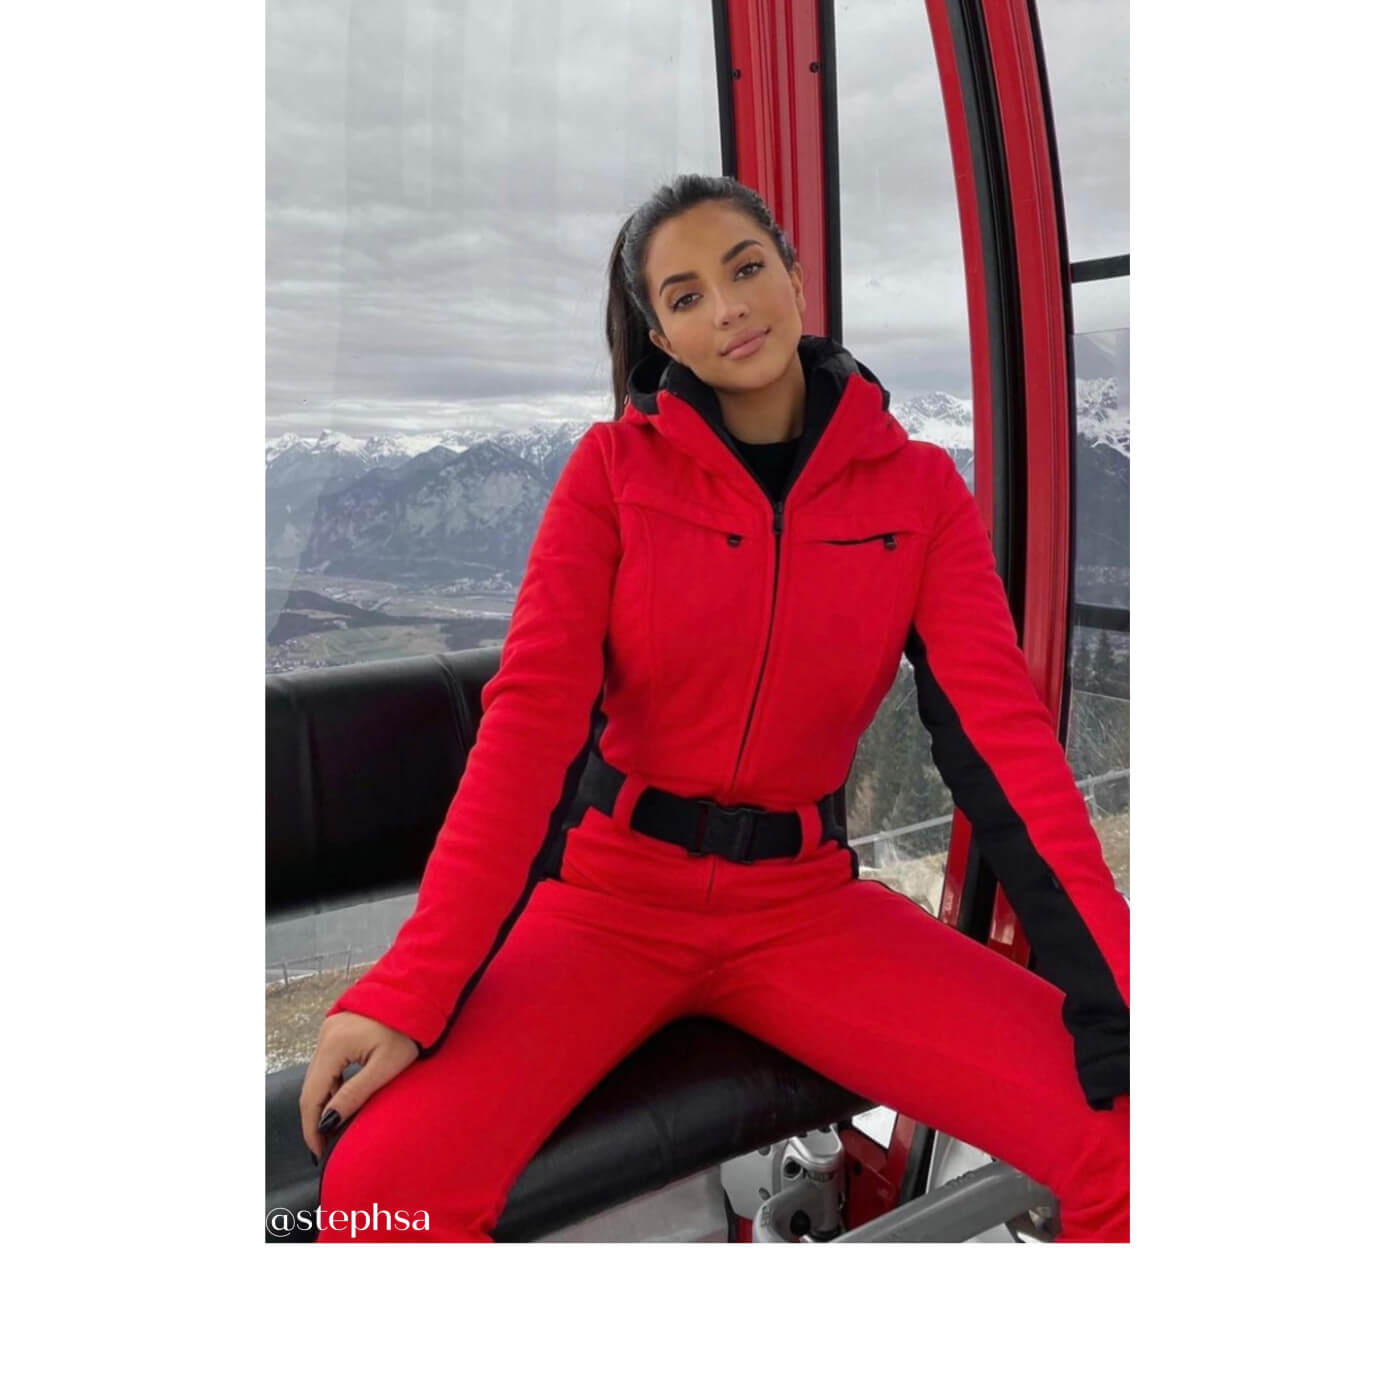 Goldbergh Parry ski suit in red for Valentine's Day Gift Guide for Skiers 2023